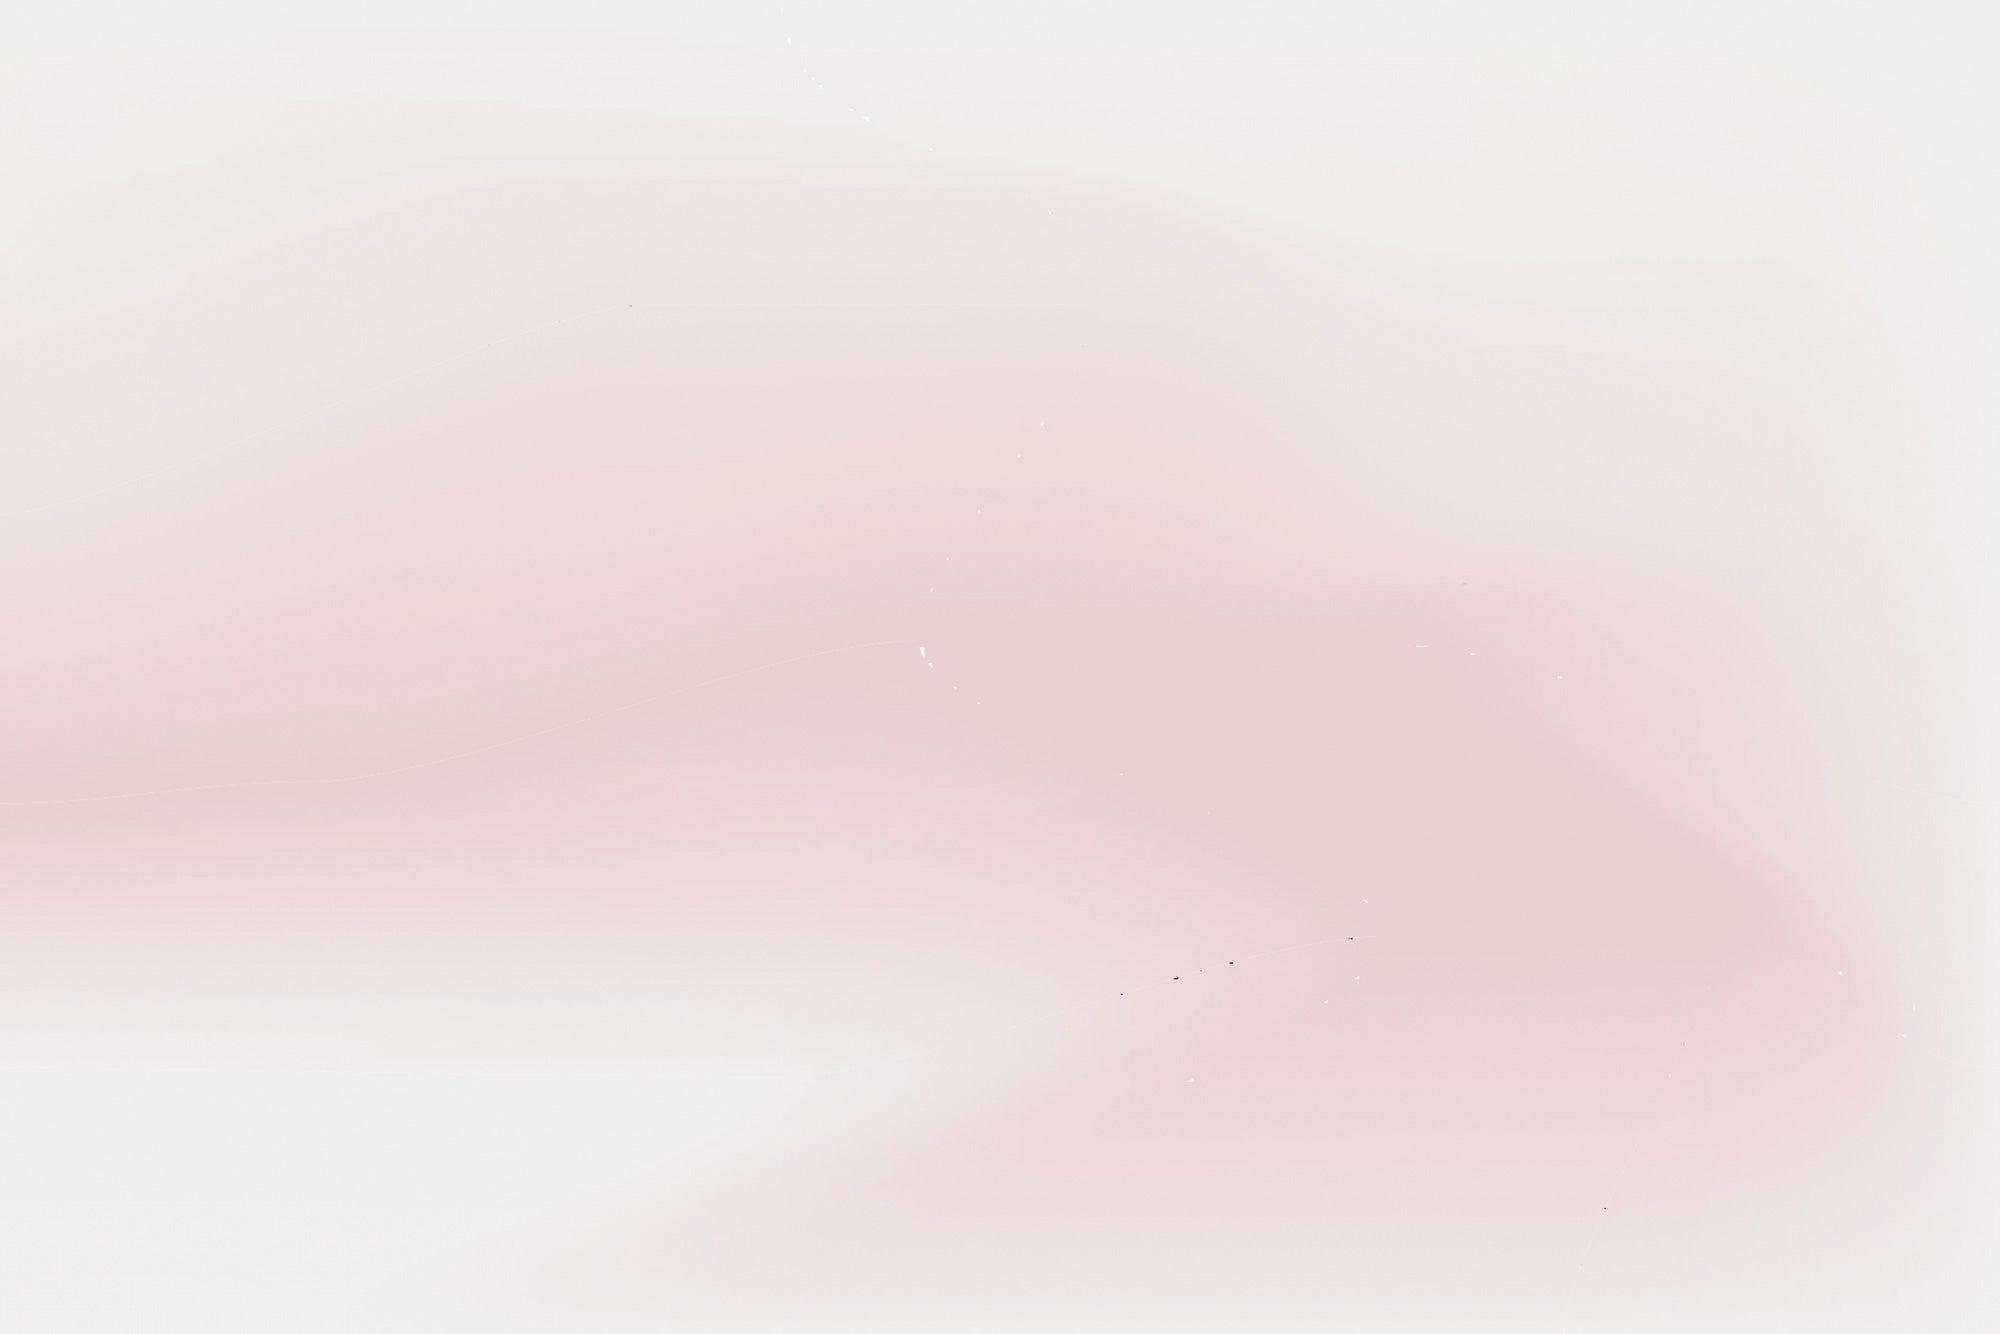 Soft Pink Gradient #2 Wall Mural | Abstract Wallpaper | Eazywallz